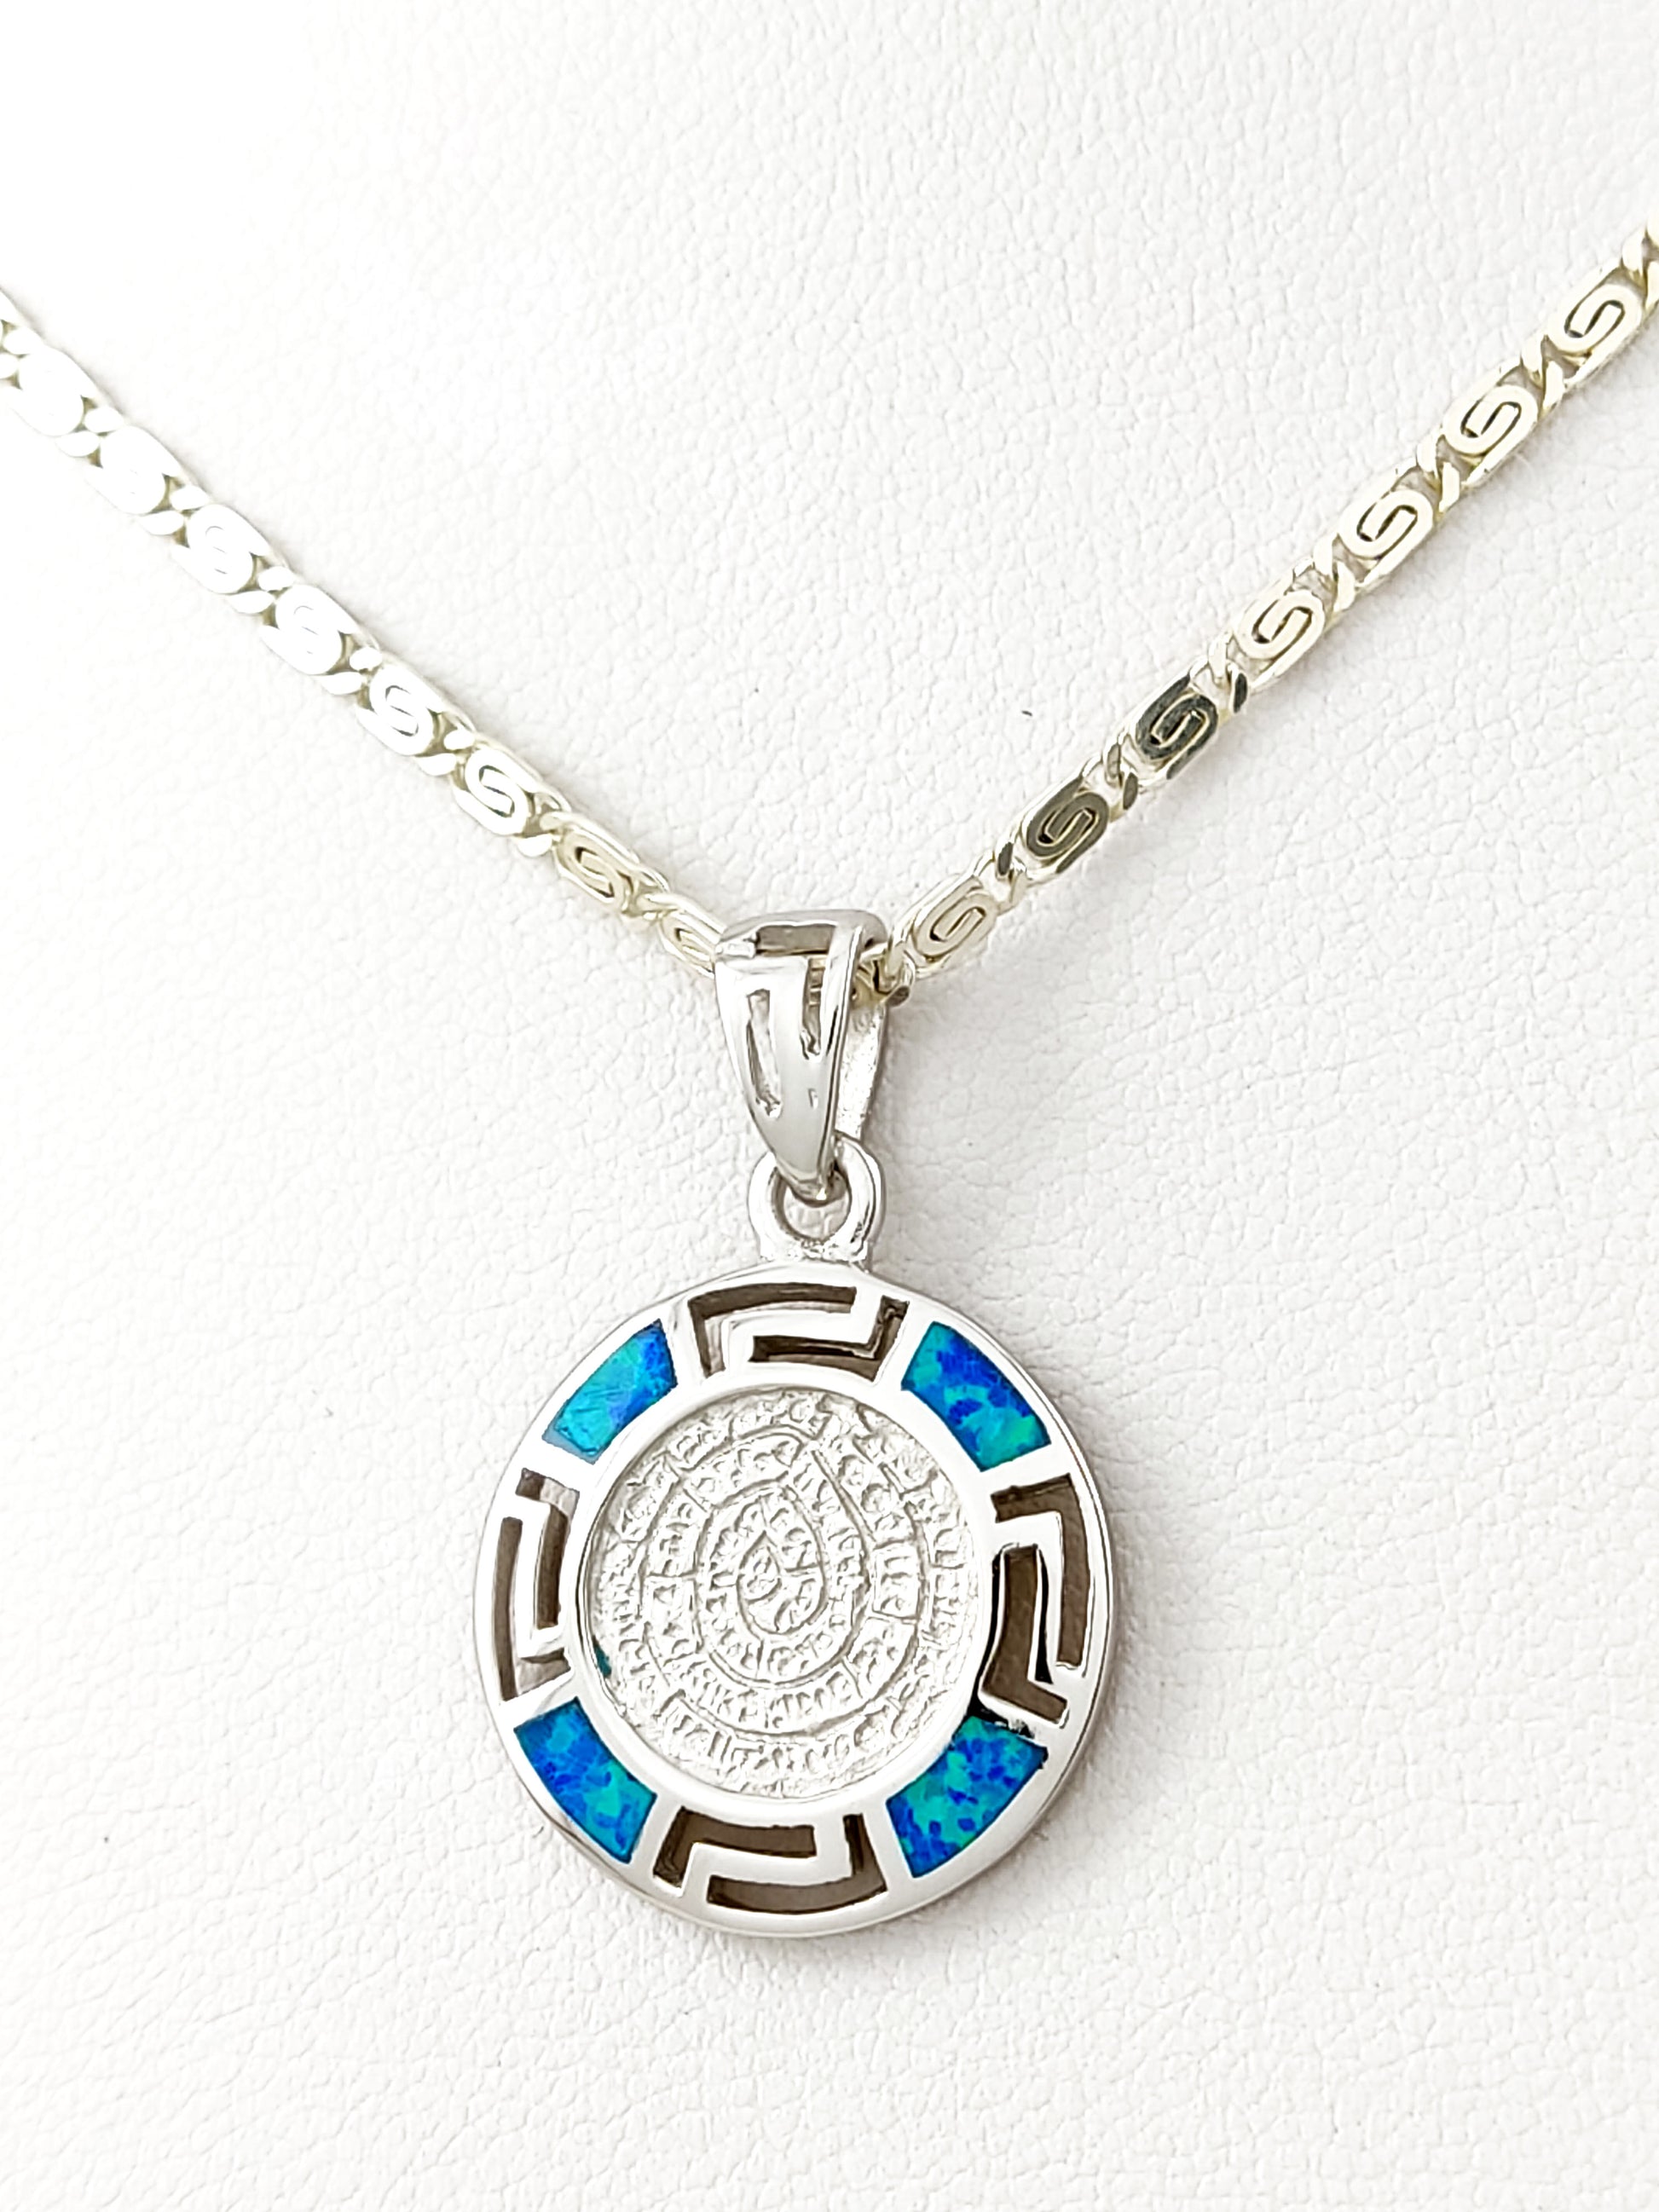 Silver necklace from Greece with the Phaistos Disc pendant  together with blue opal stones.